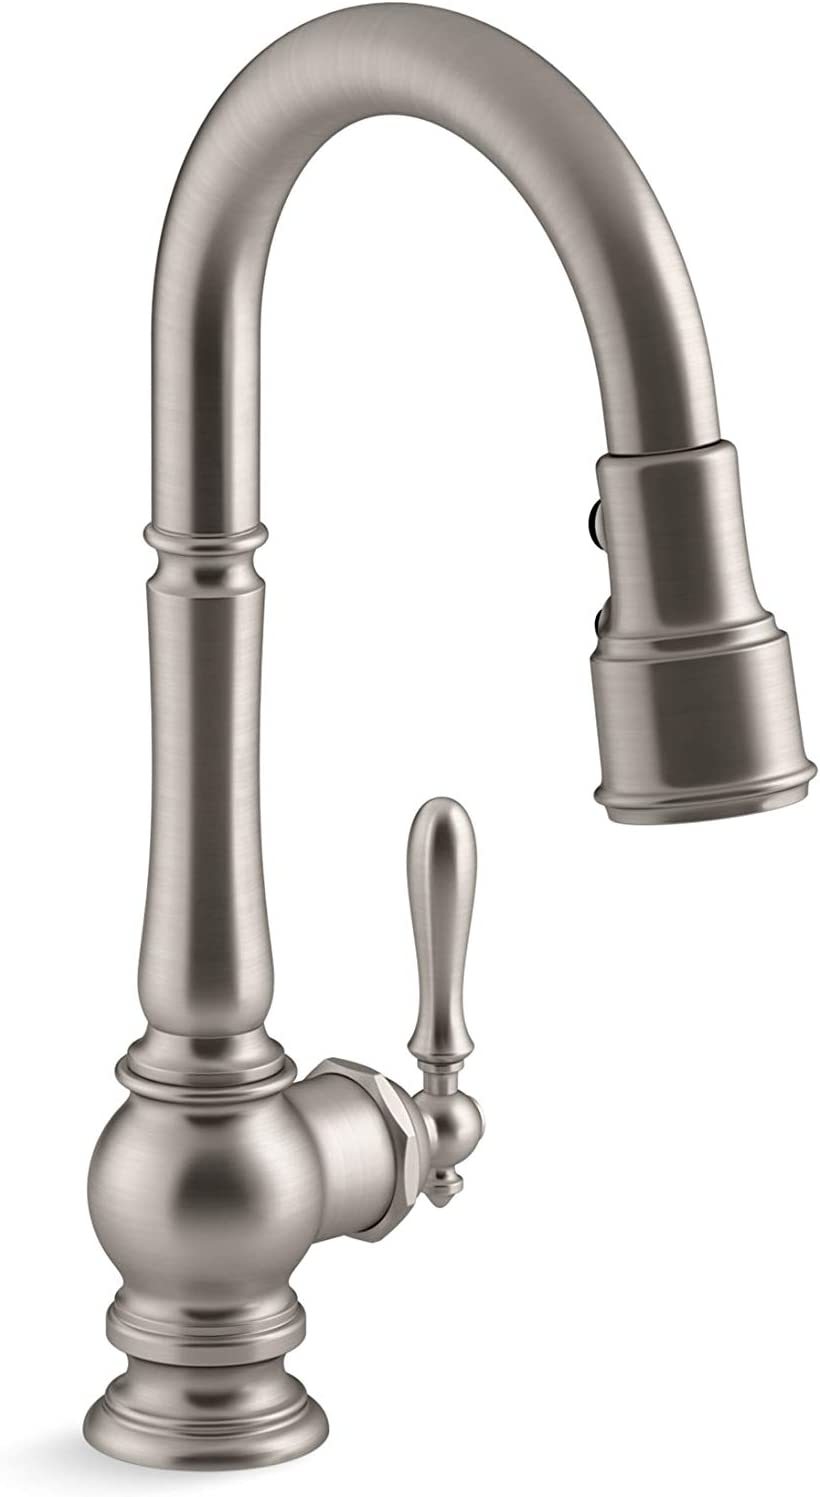 Primary image for Kohler 99261-VS Artifacts Kitchen Faucet - Vibrant Stainless - FREE Shipping!